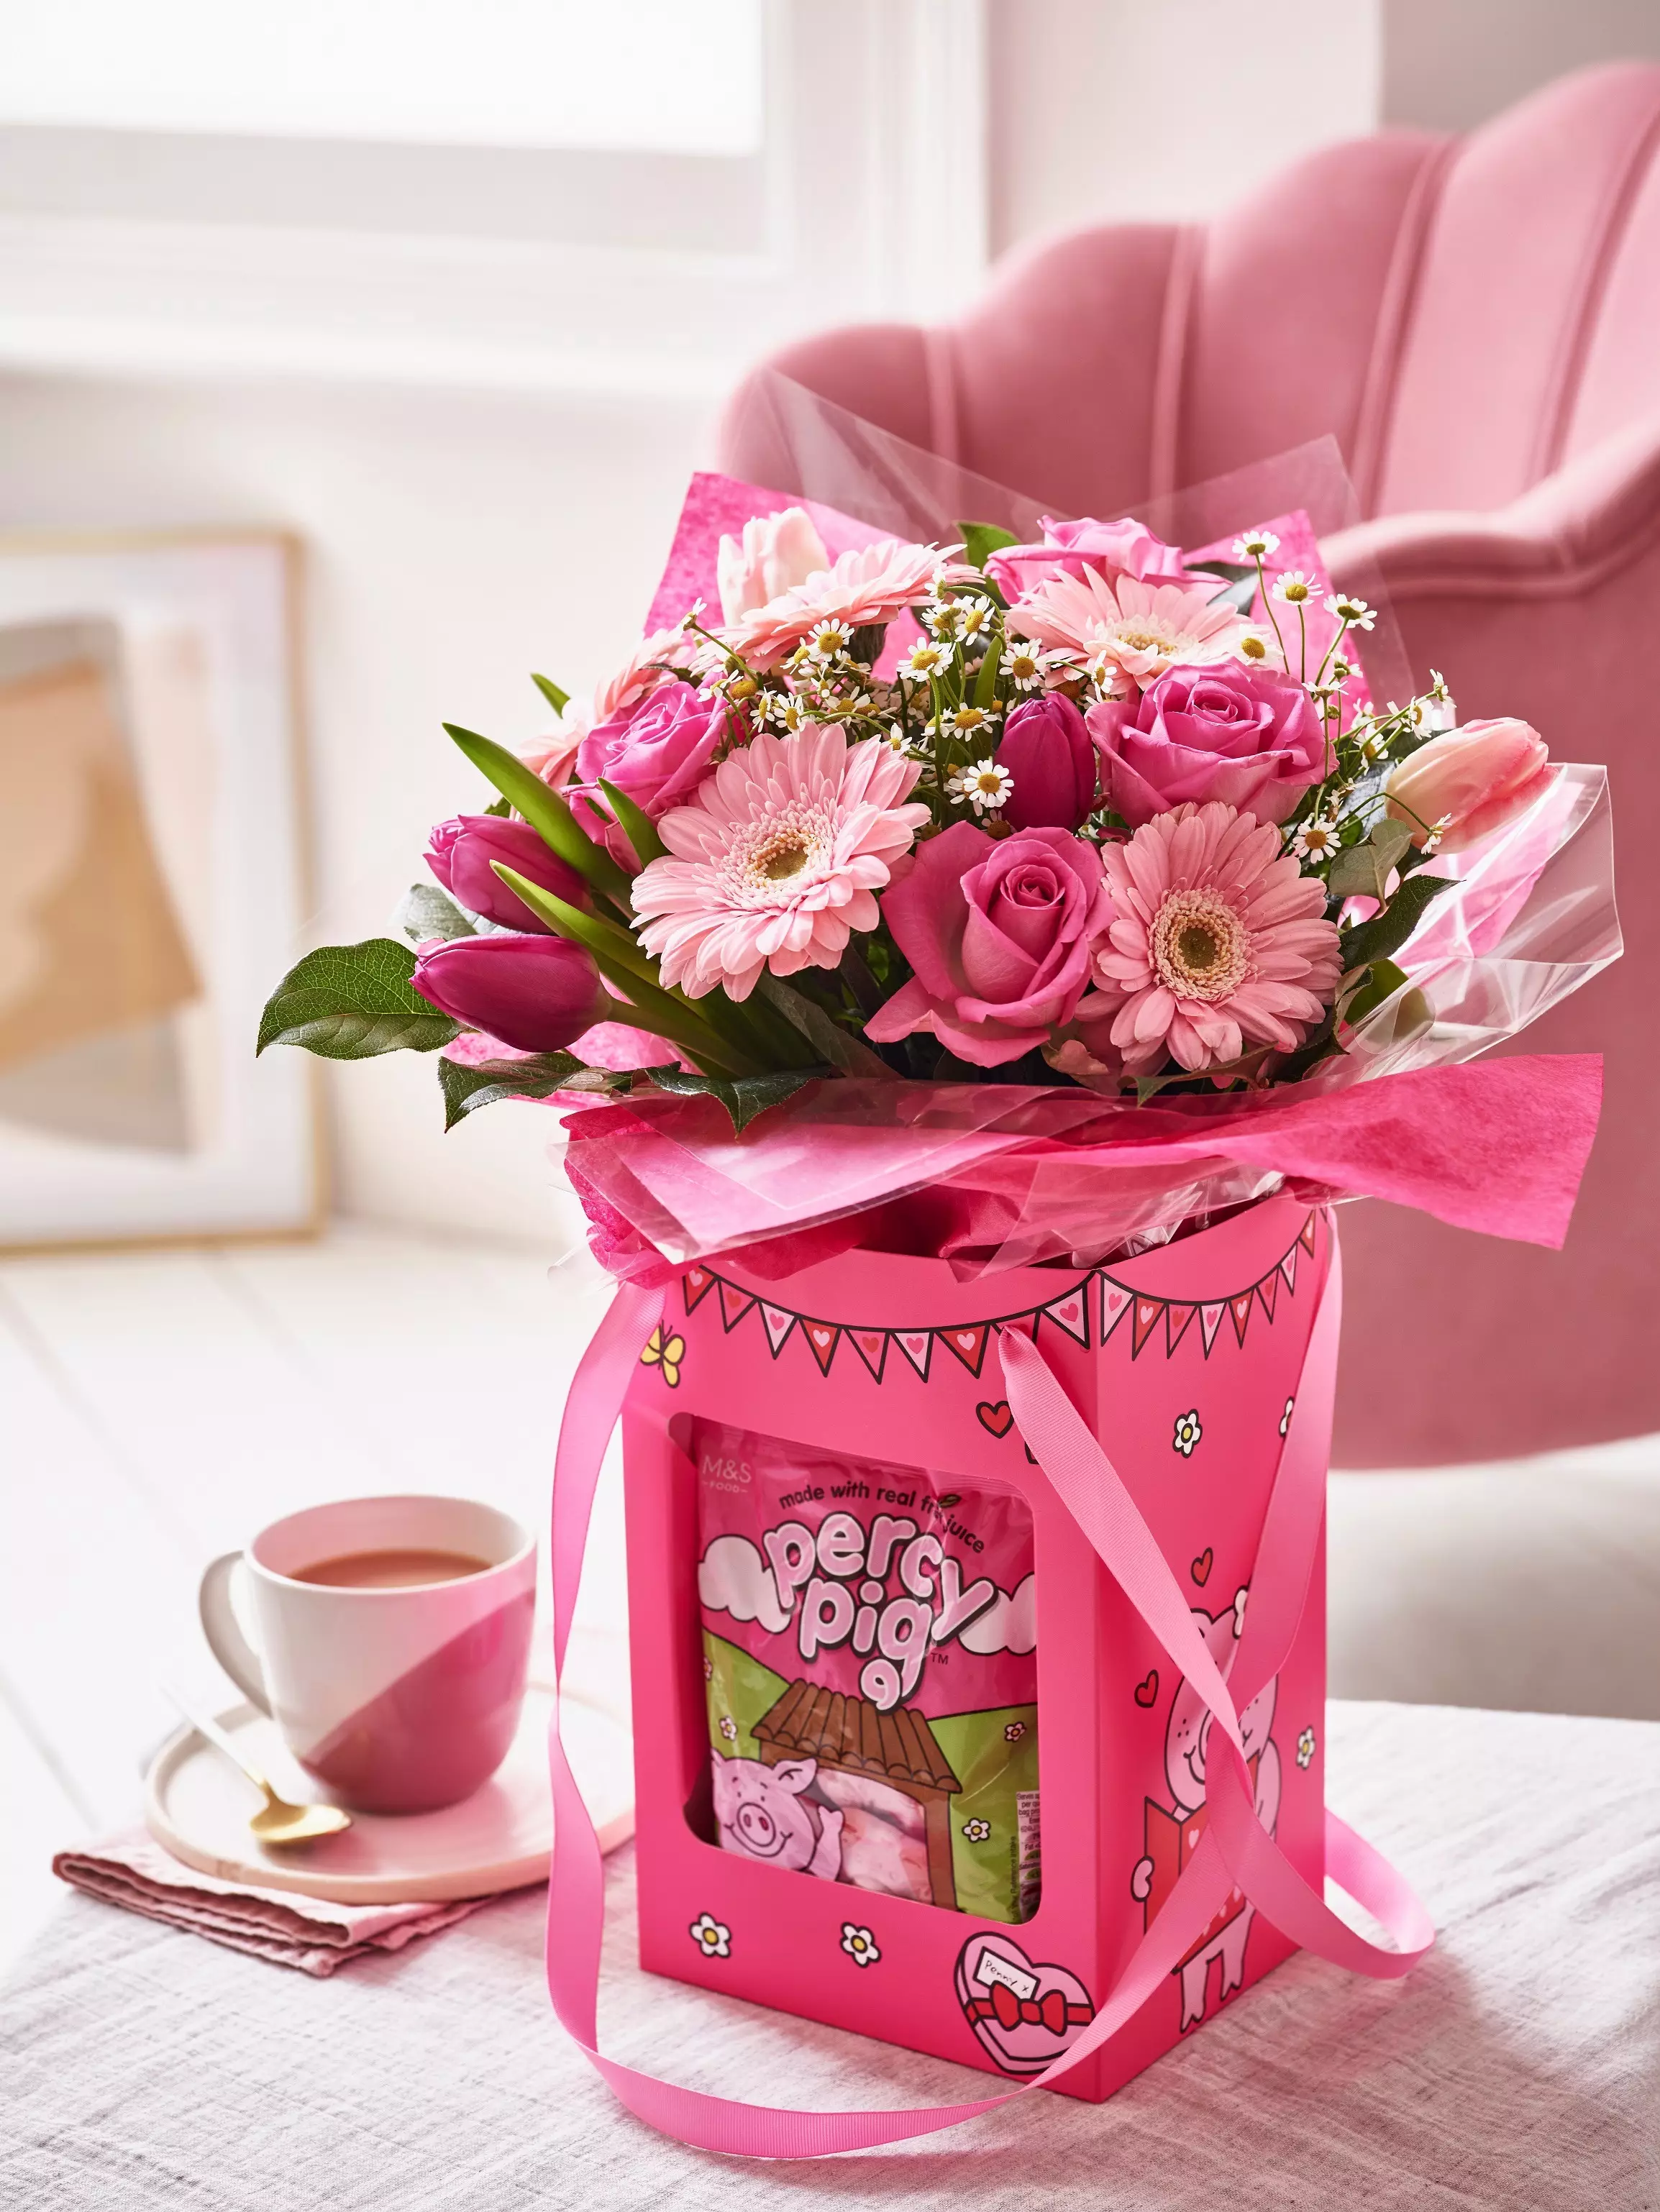 The Valentine's Percy Pig Gift Bag features a beautiful bouquet of pink flowers and Percy sweets (